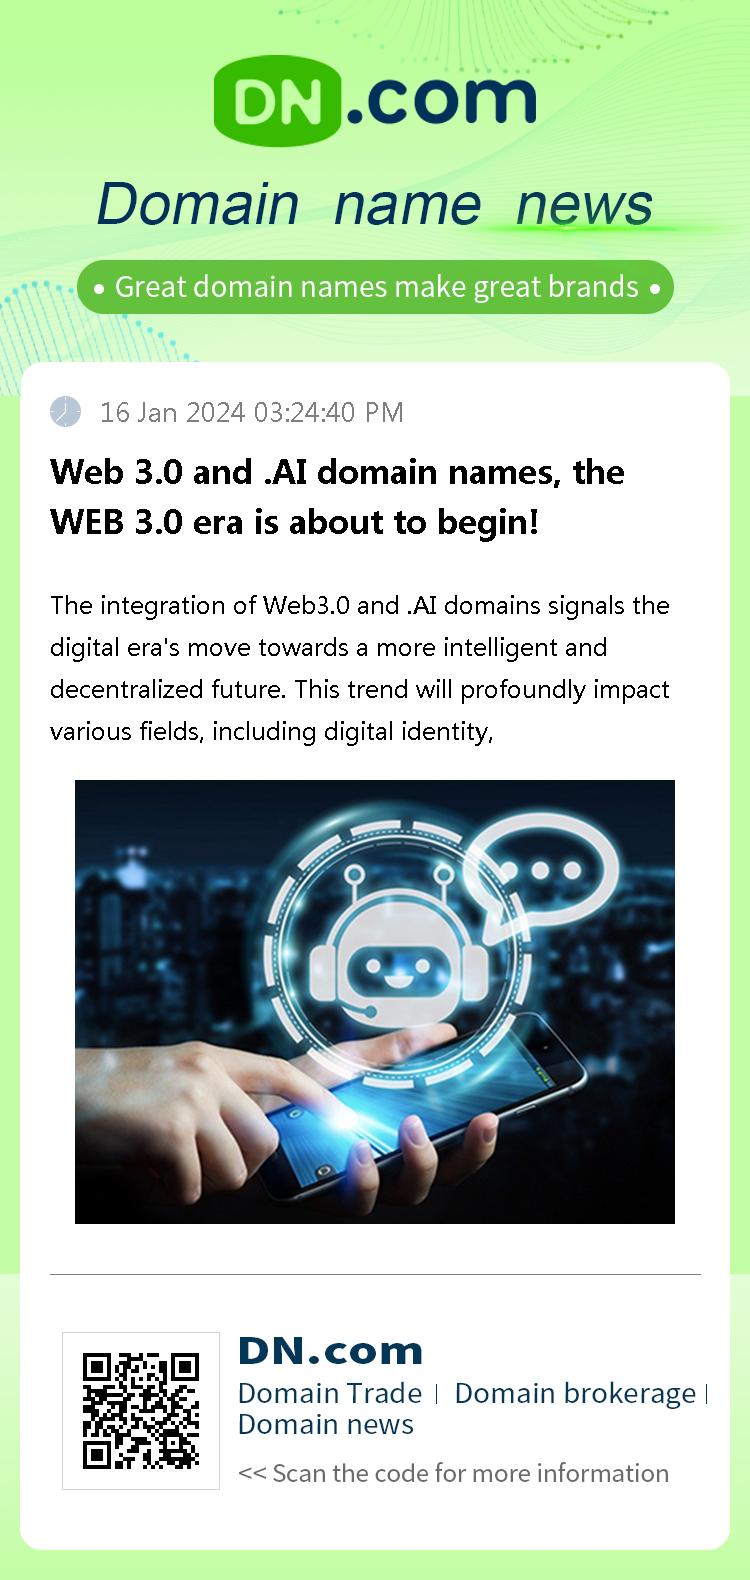 Web 3.0 and .AI domain names, the WEB 3.0 era is about to begin!